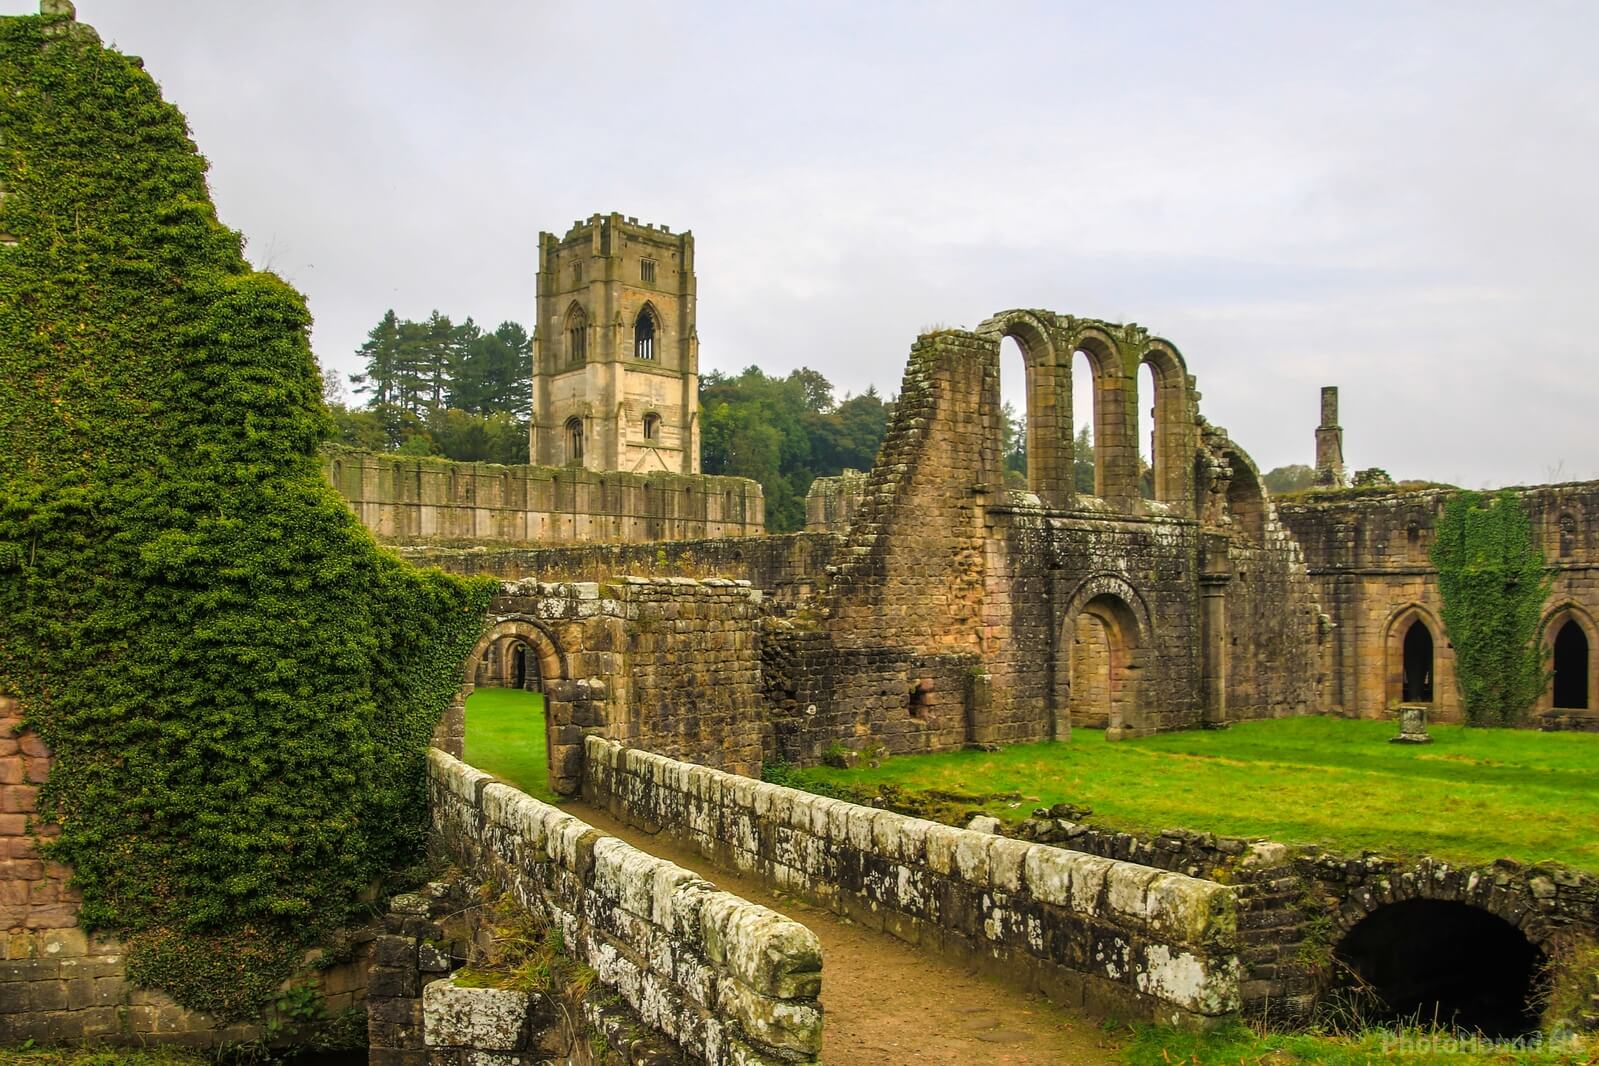 Image of Fountains Abbey by Andy Killingbeck